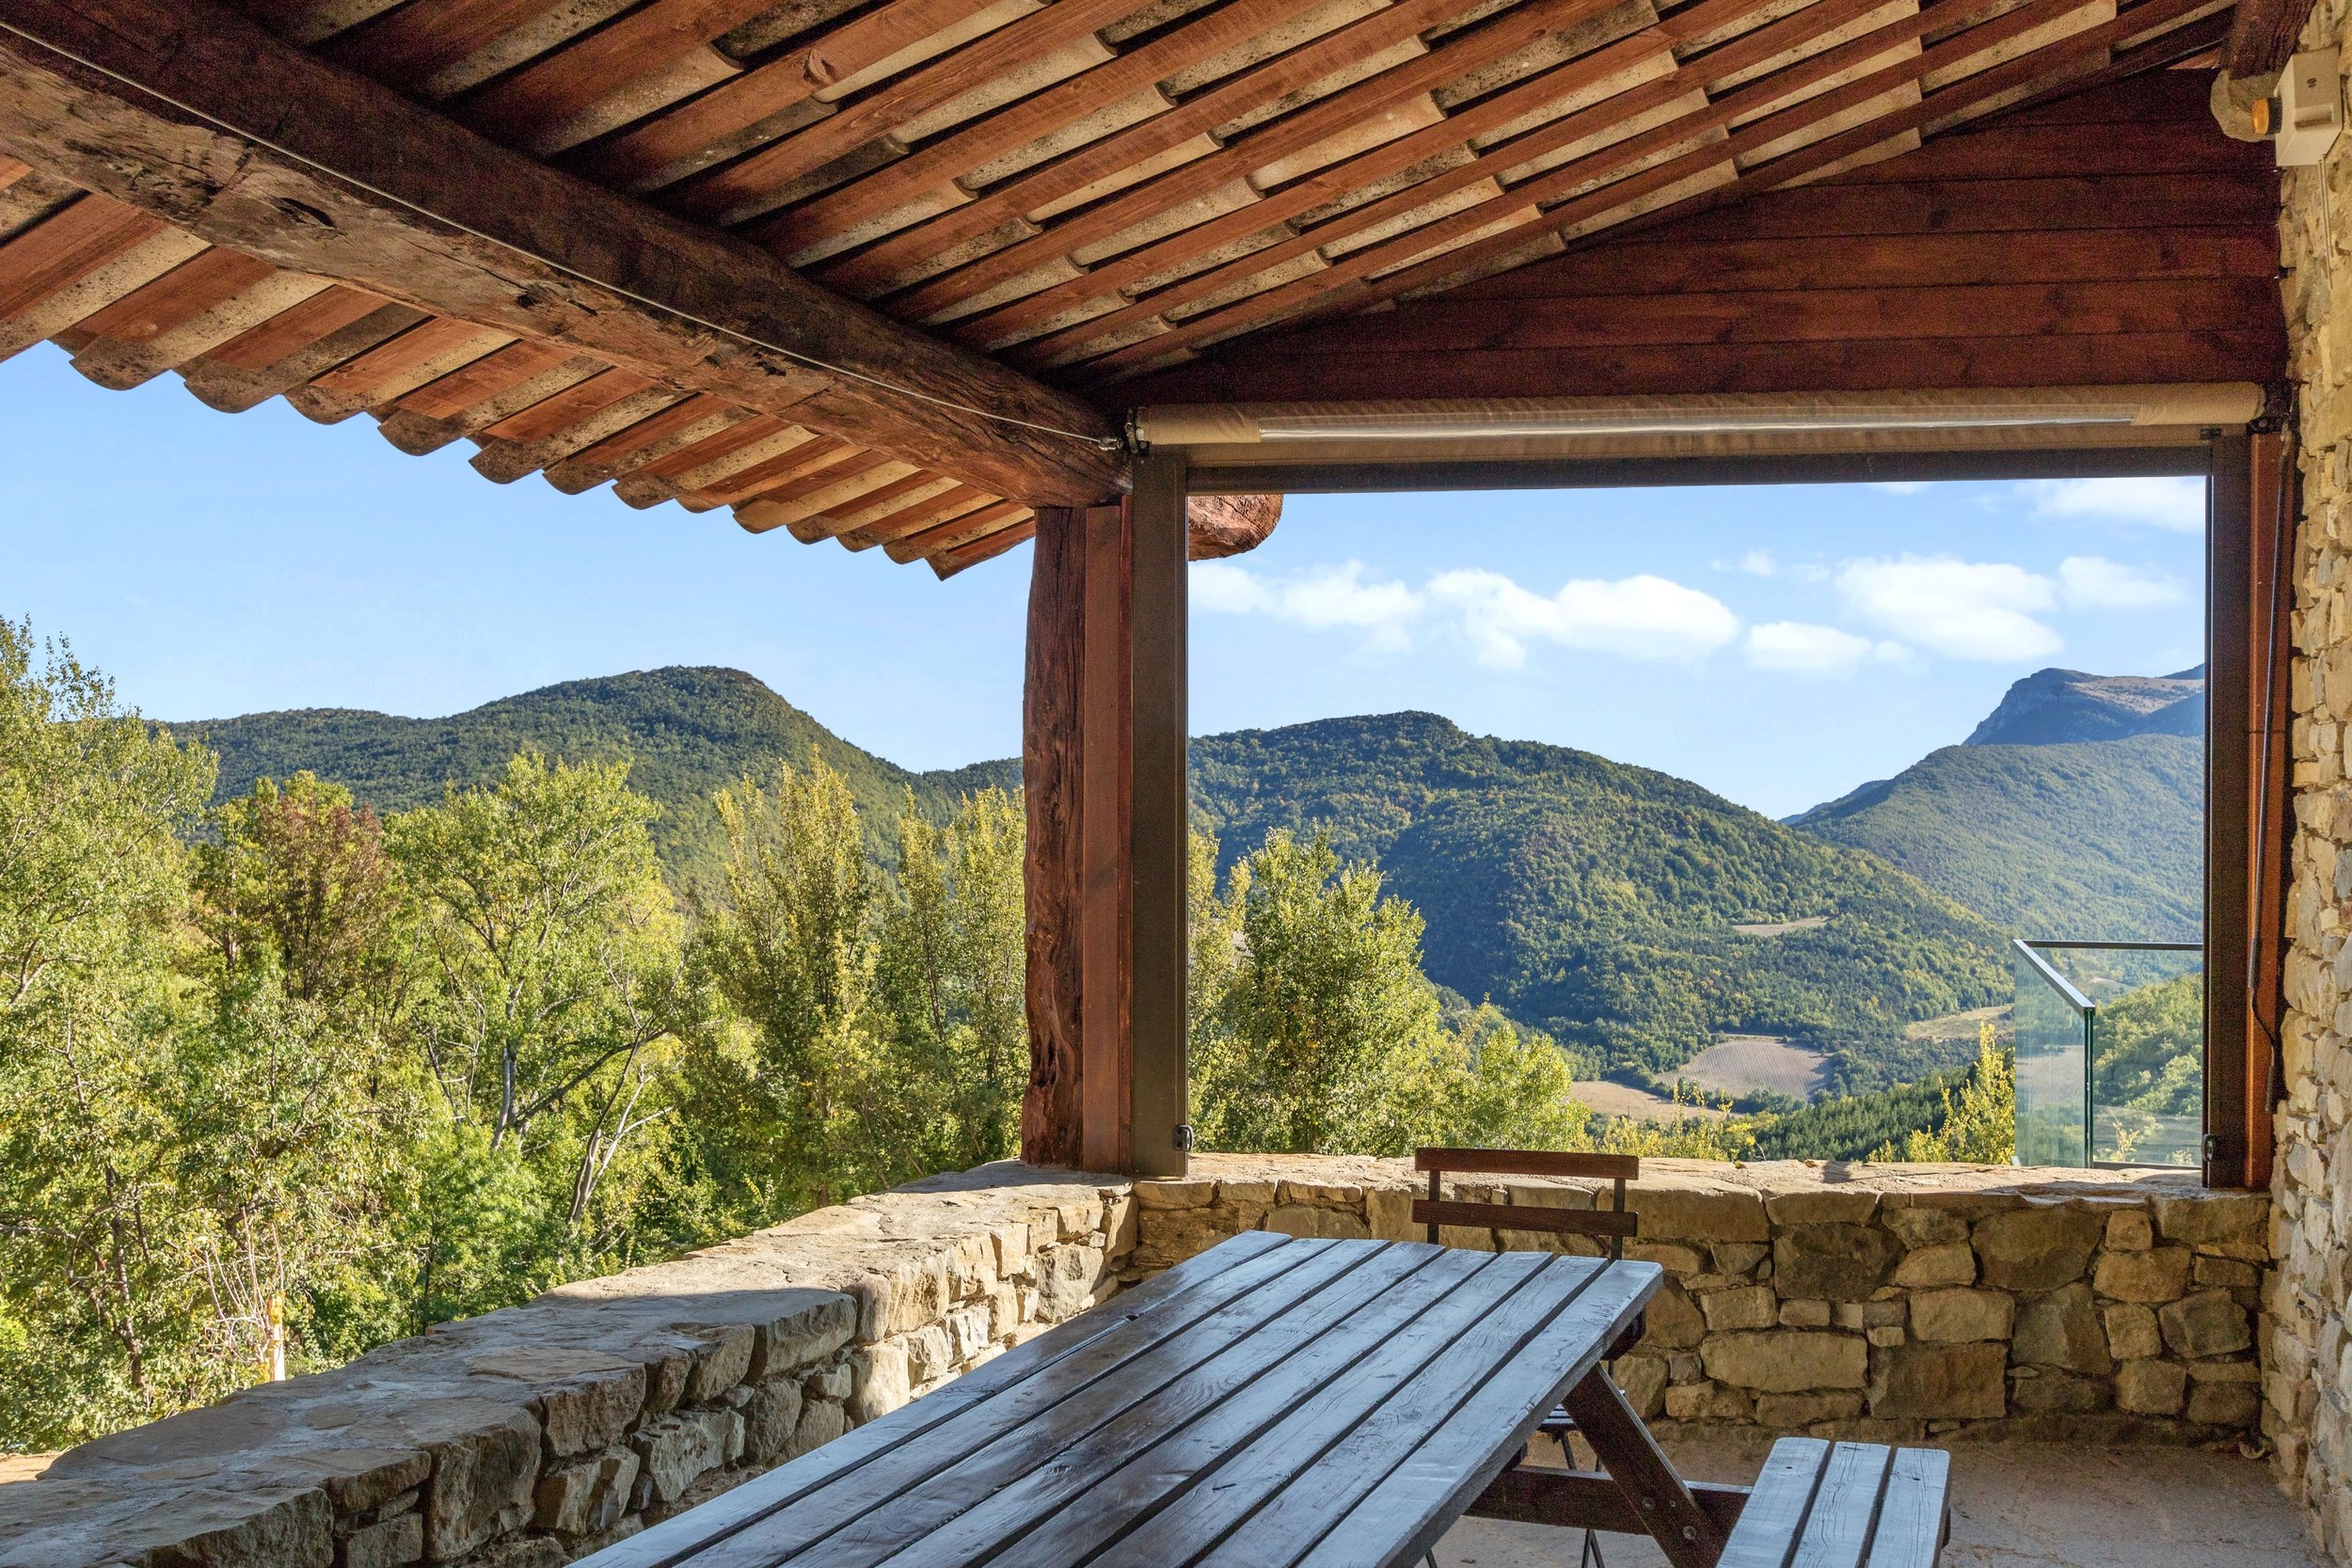 Luxury and ecological villa to organize your seminar in Drôme provençale in the South of France